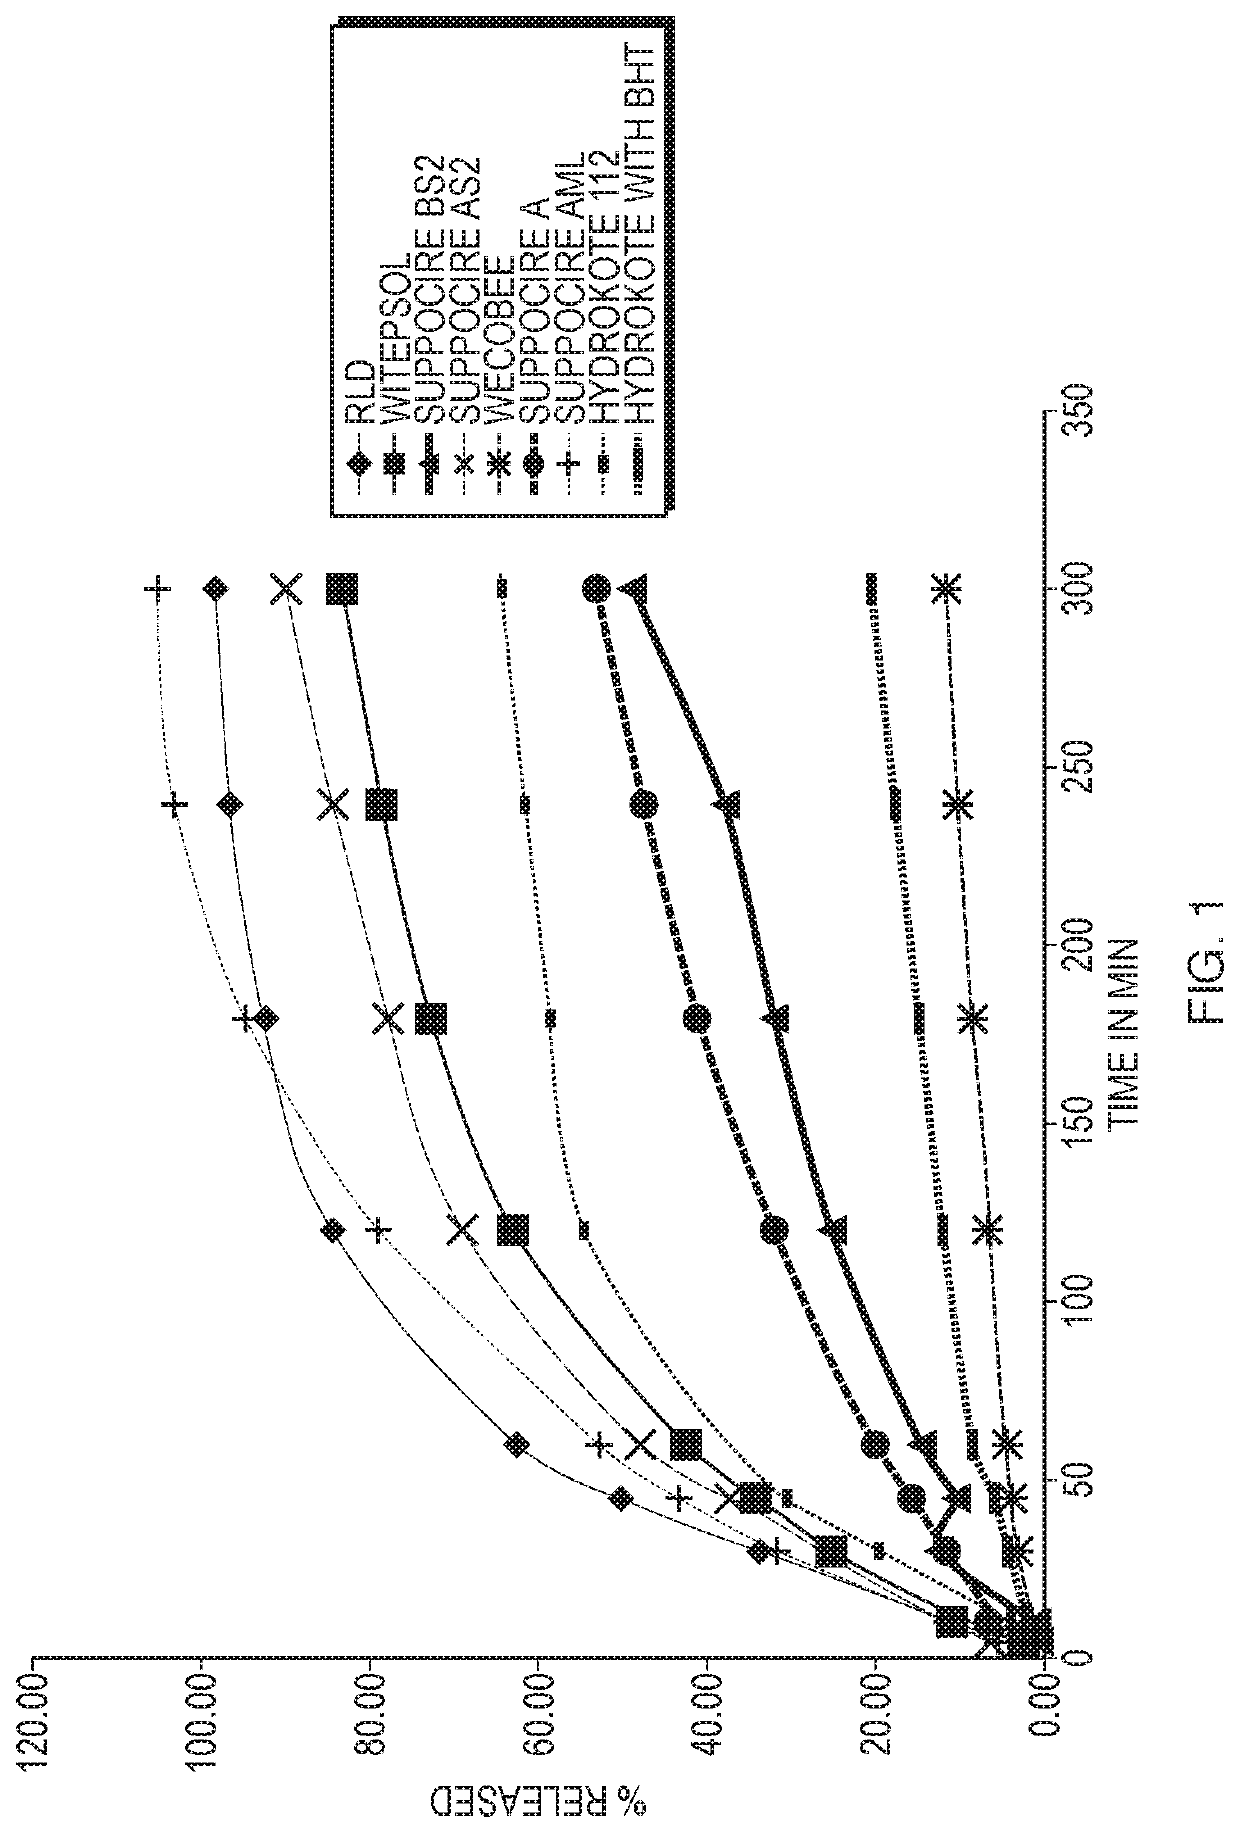 Hydrocortisone acetate suppository formulation for treatment of disease